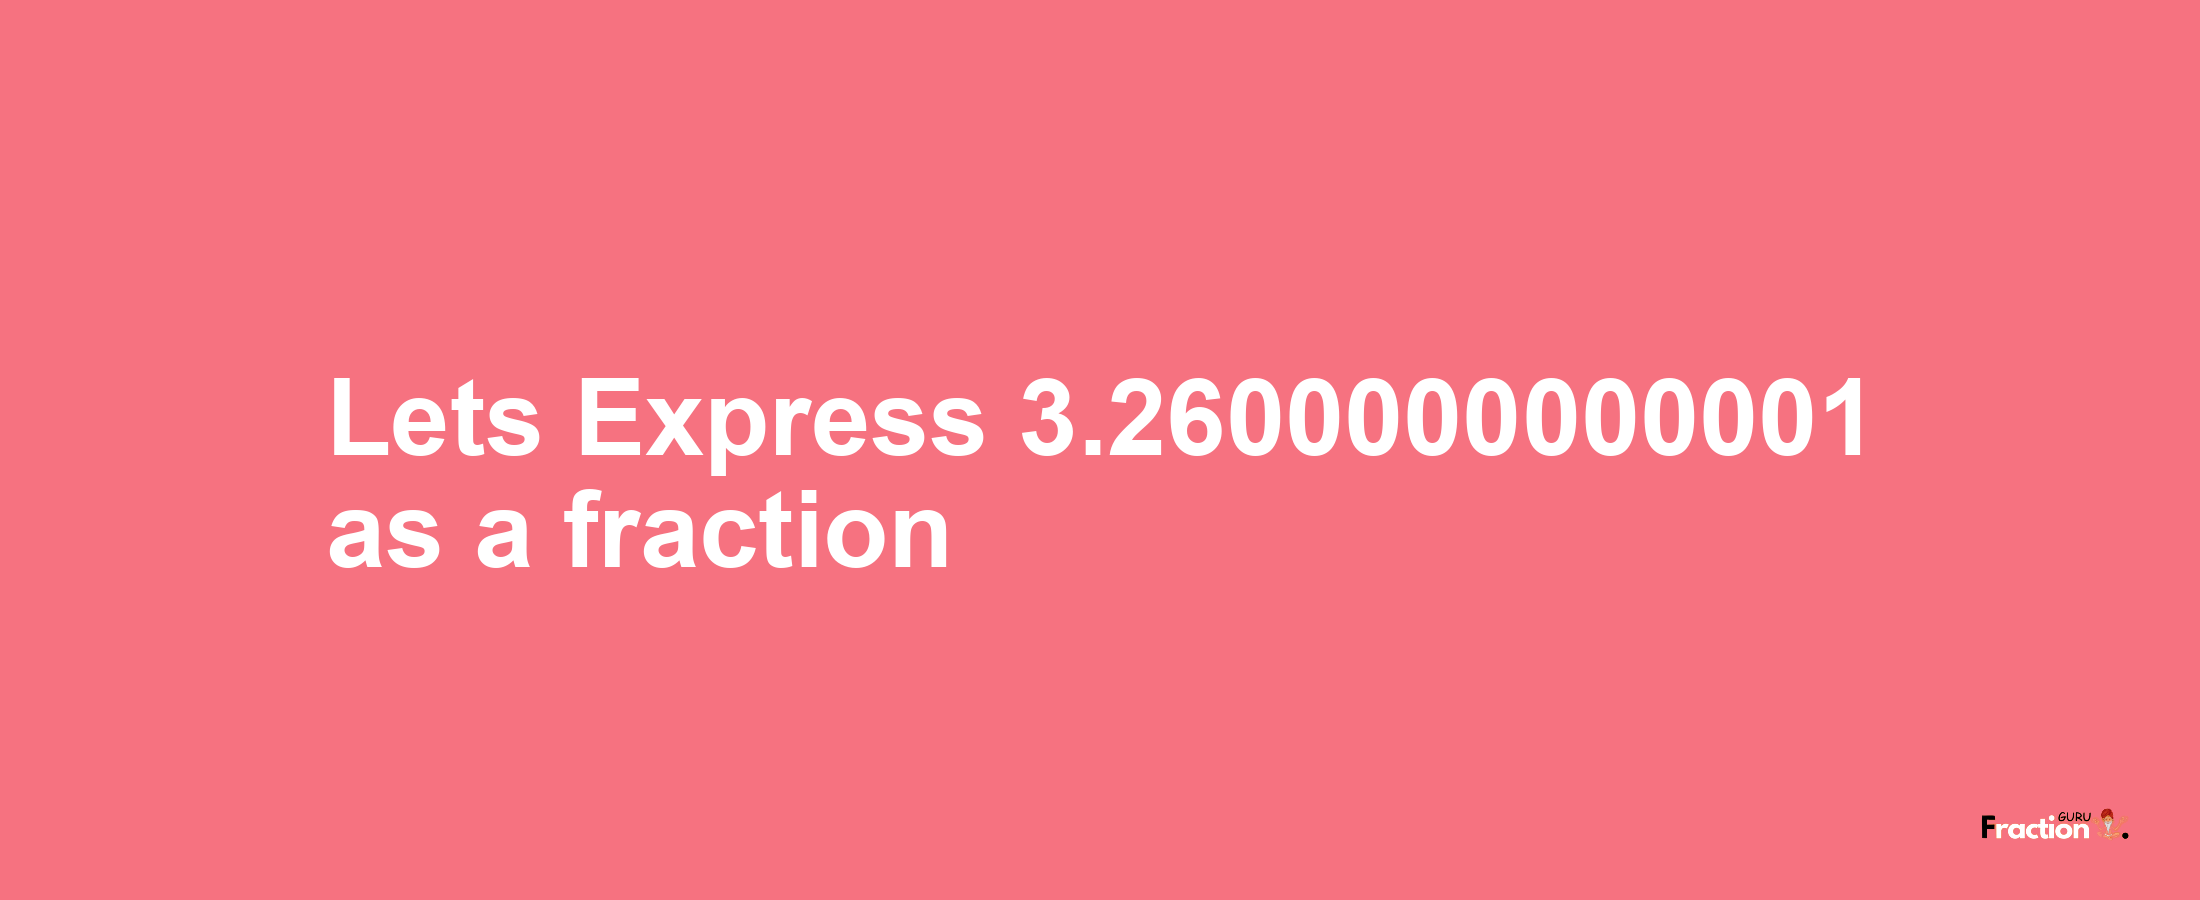 Lets Express 3.2600000000001 as afraction